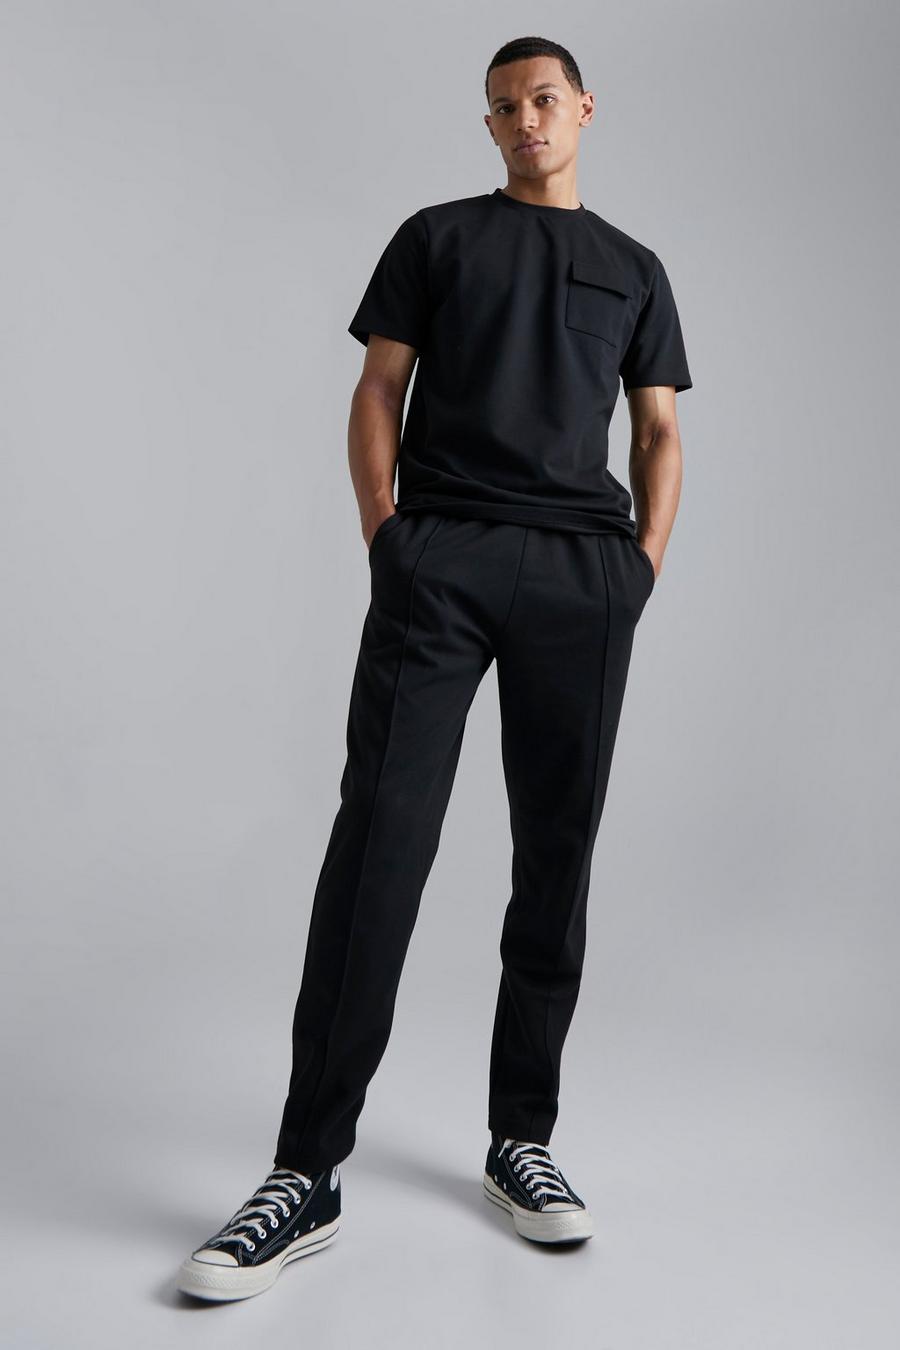 Black noir Tall Slim Fit T-shirt And Tapered Jogger Set